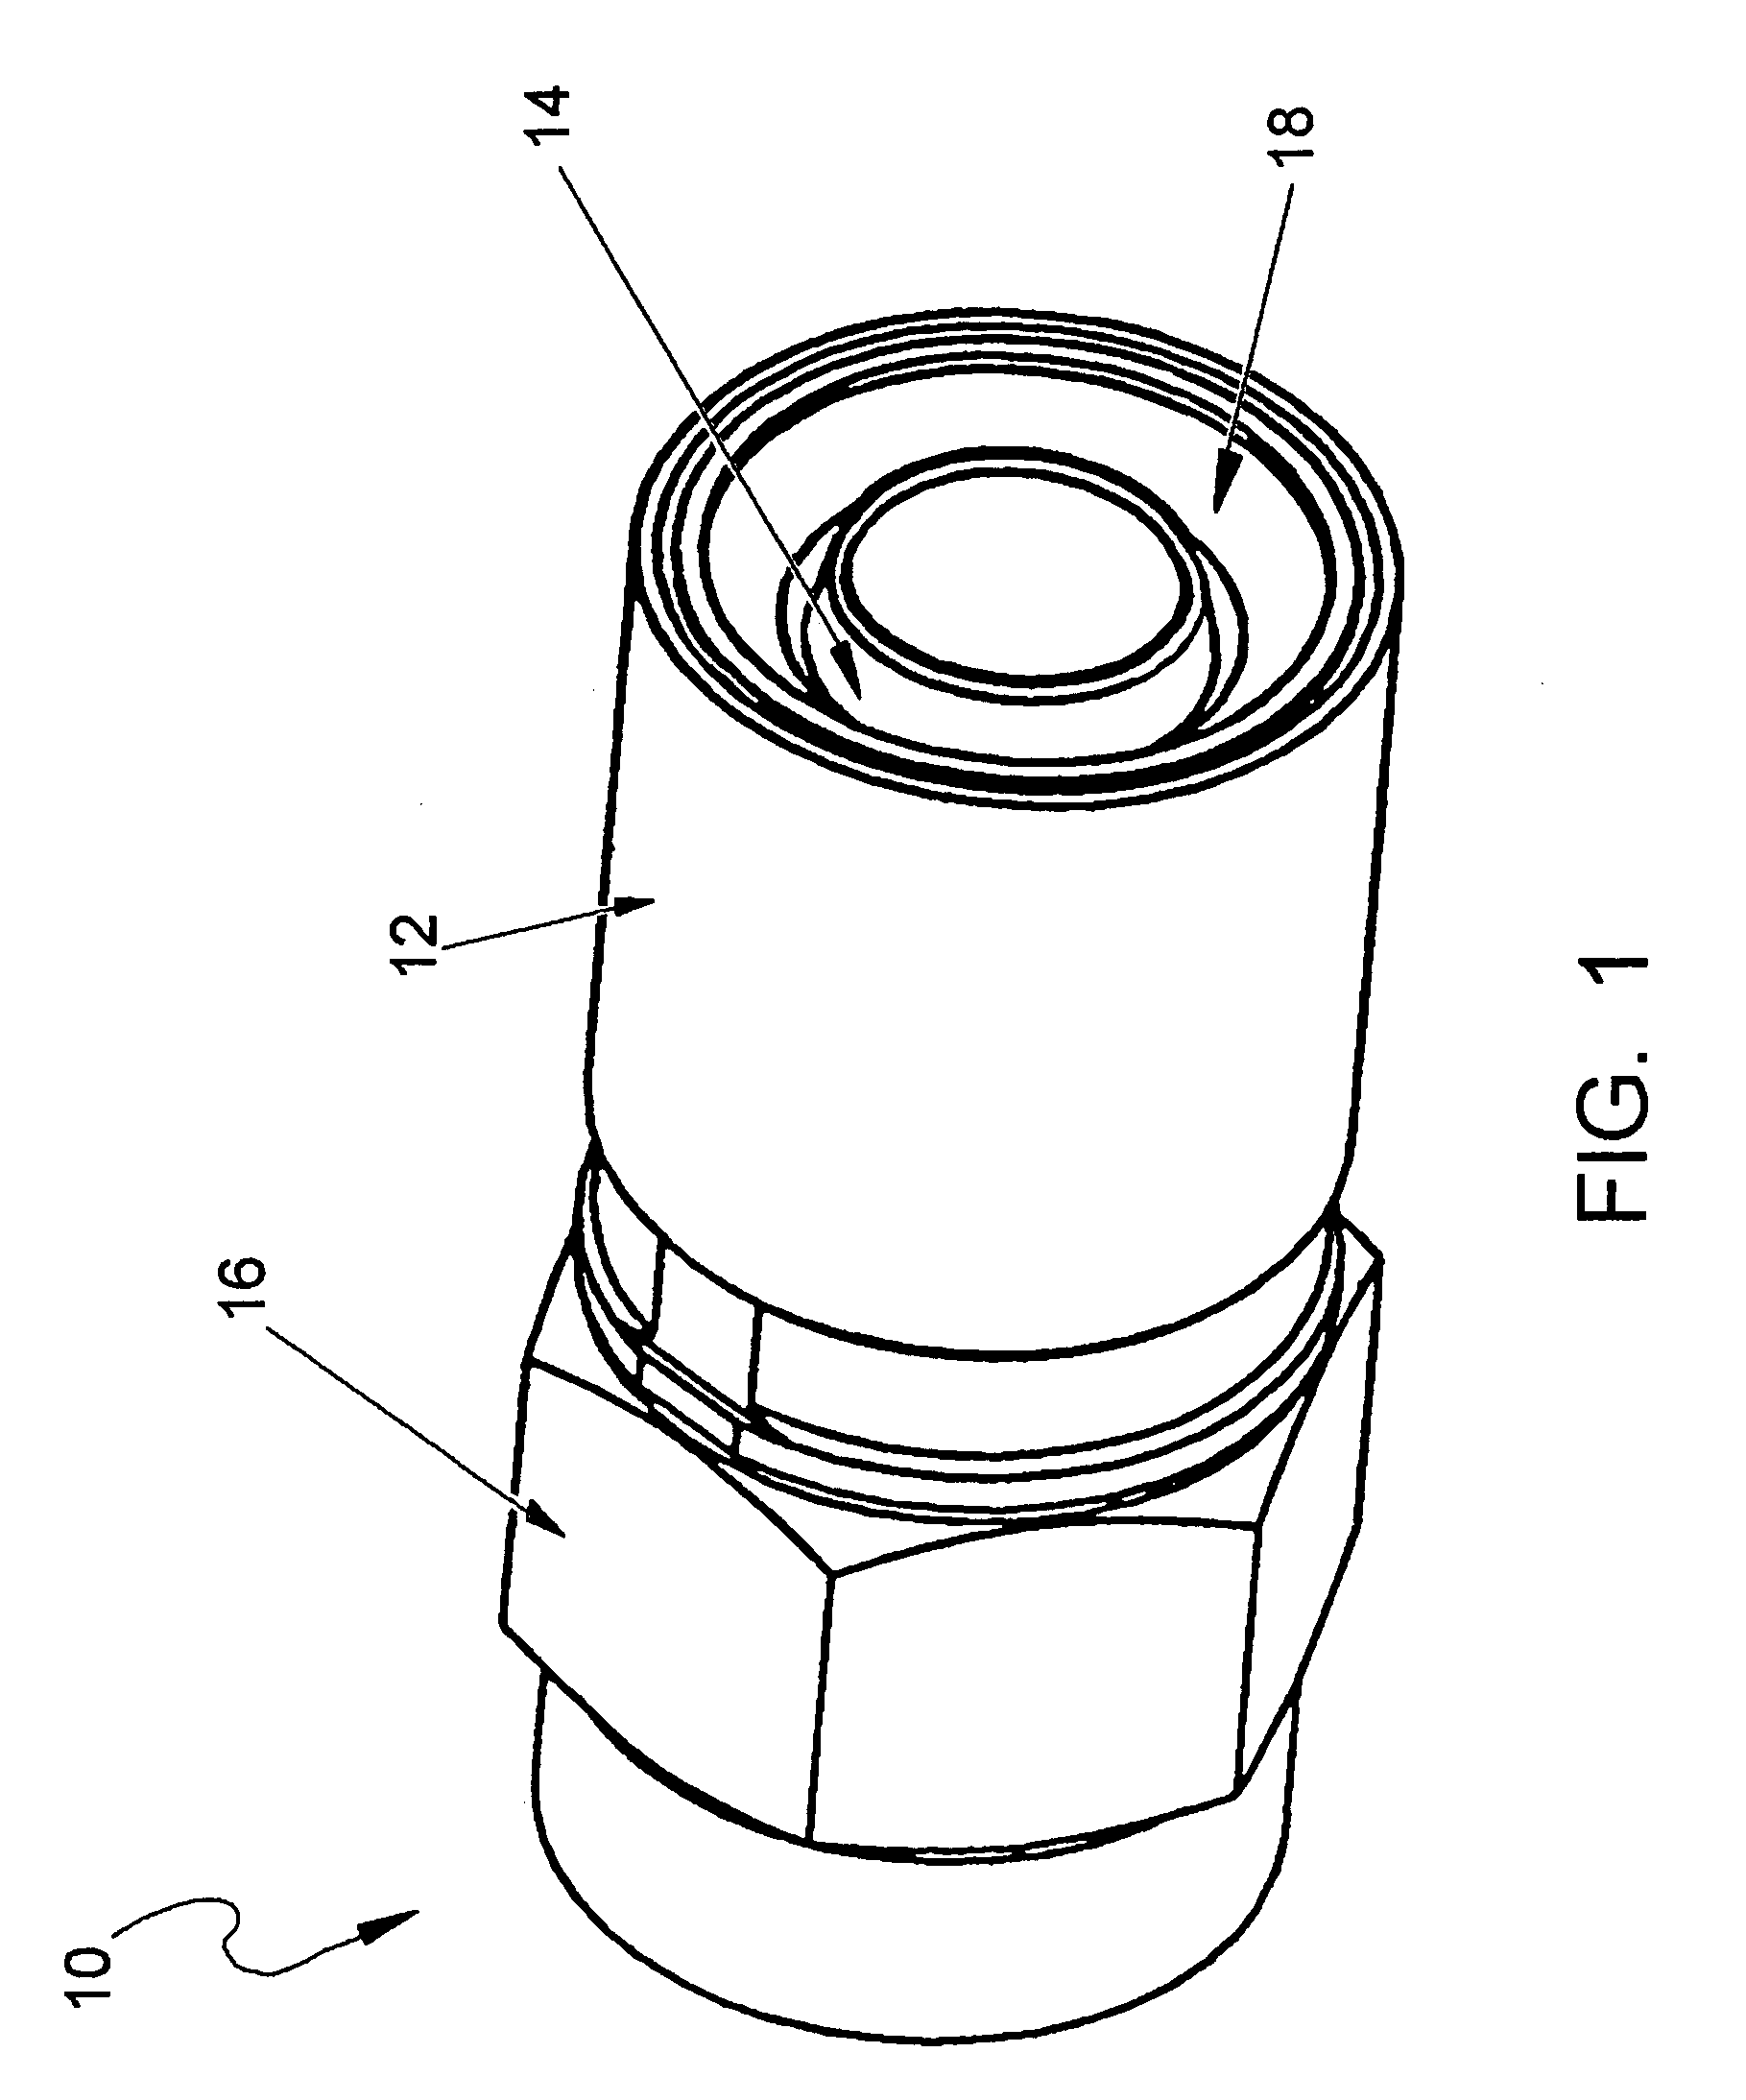 Coaxial cable connector with self-gripping and self-sealing features